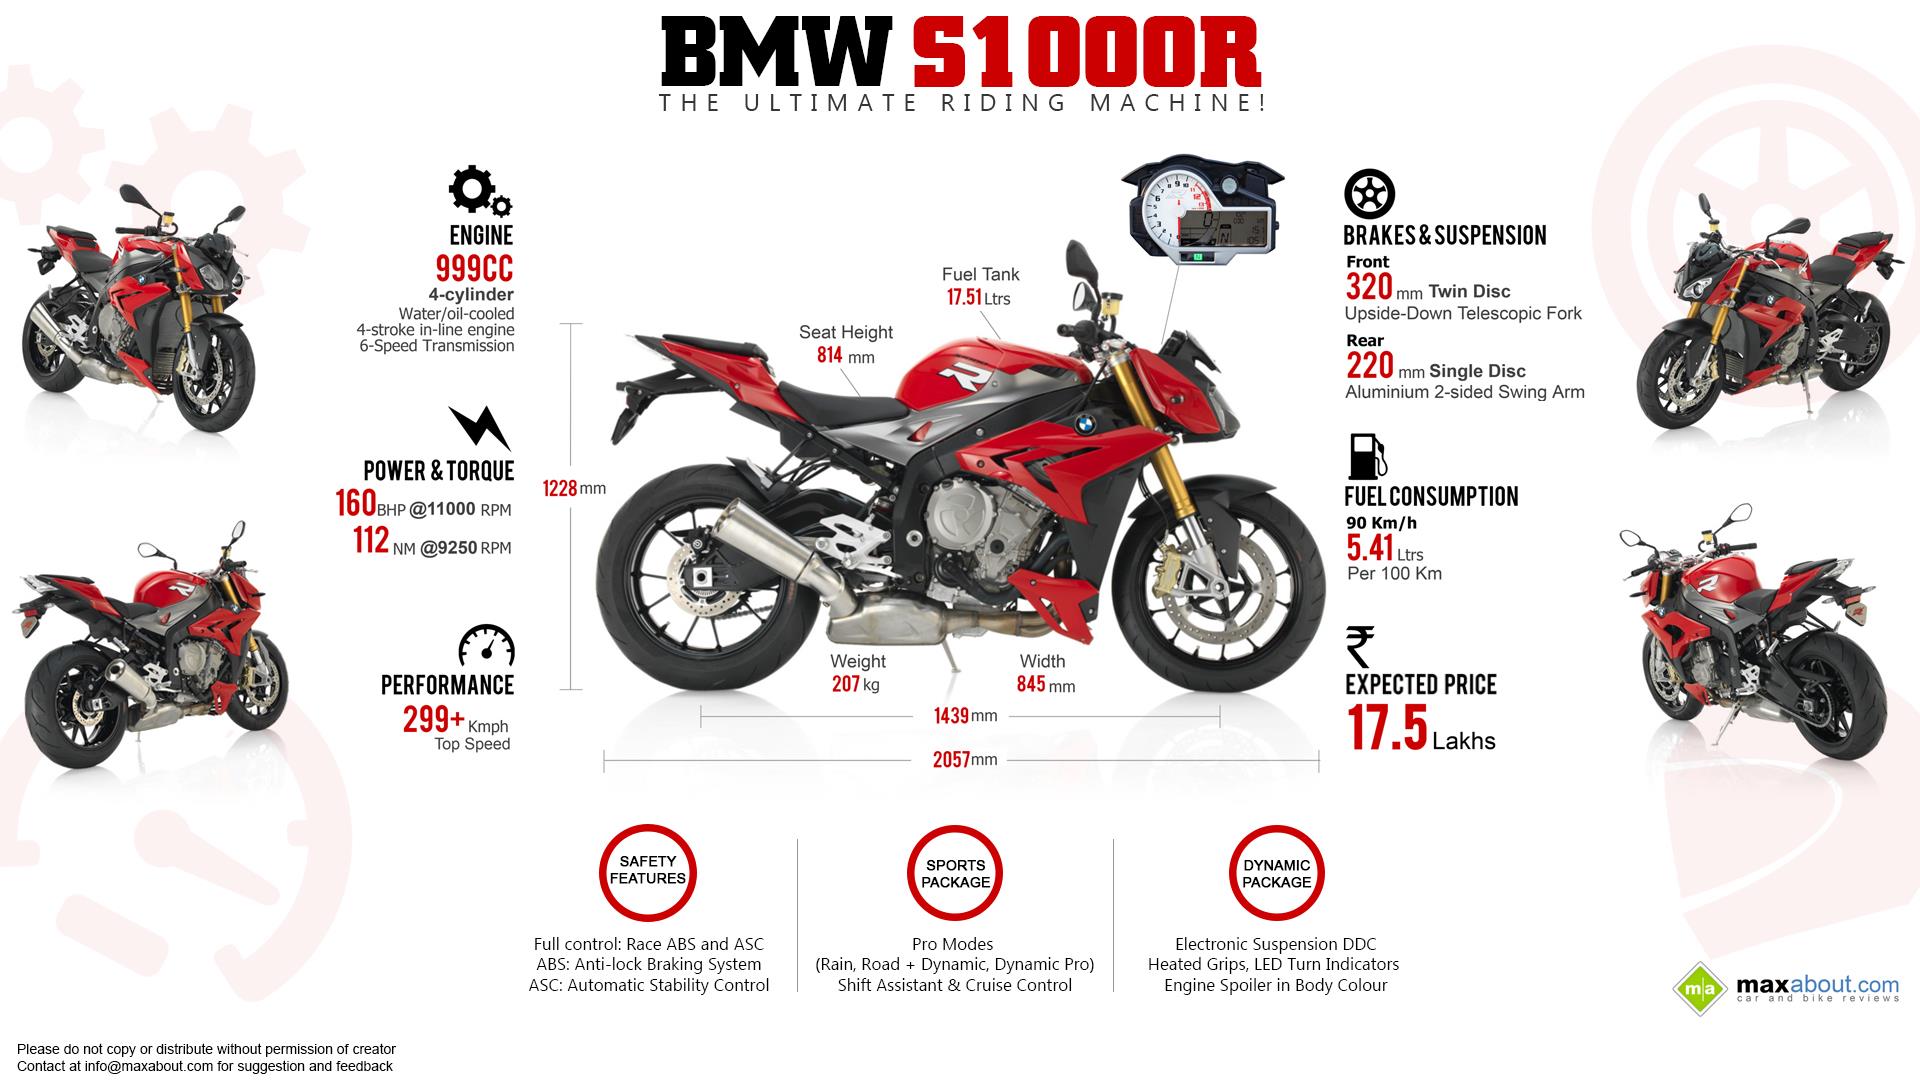 Bmw motorcycles the ultimate riding machines #2